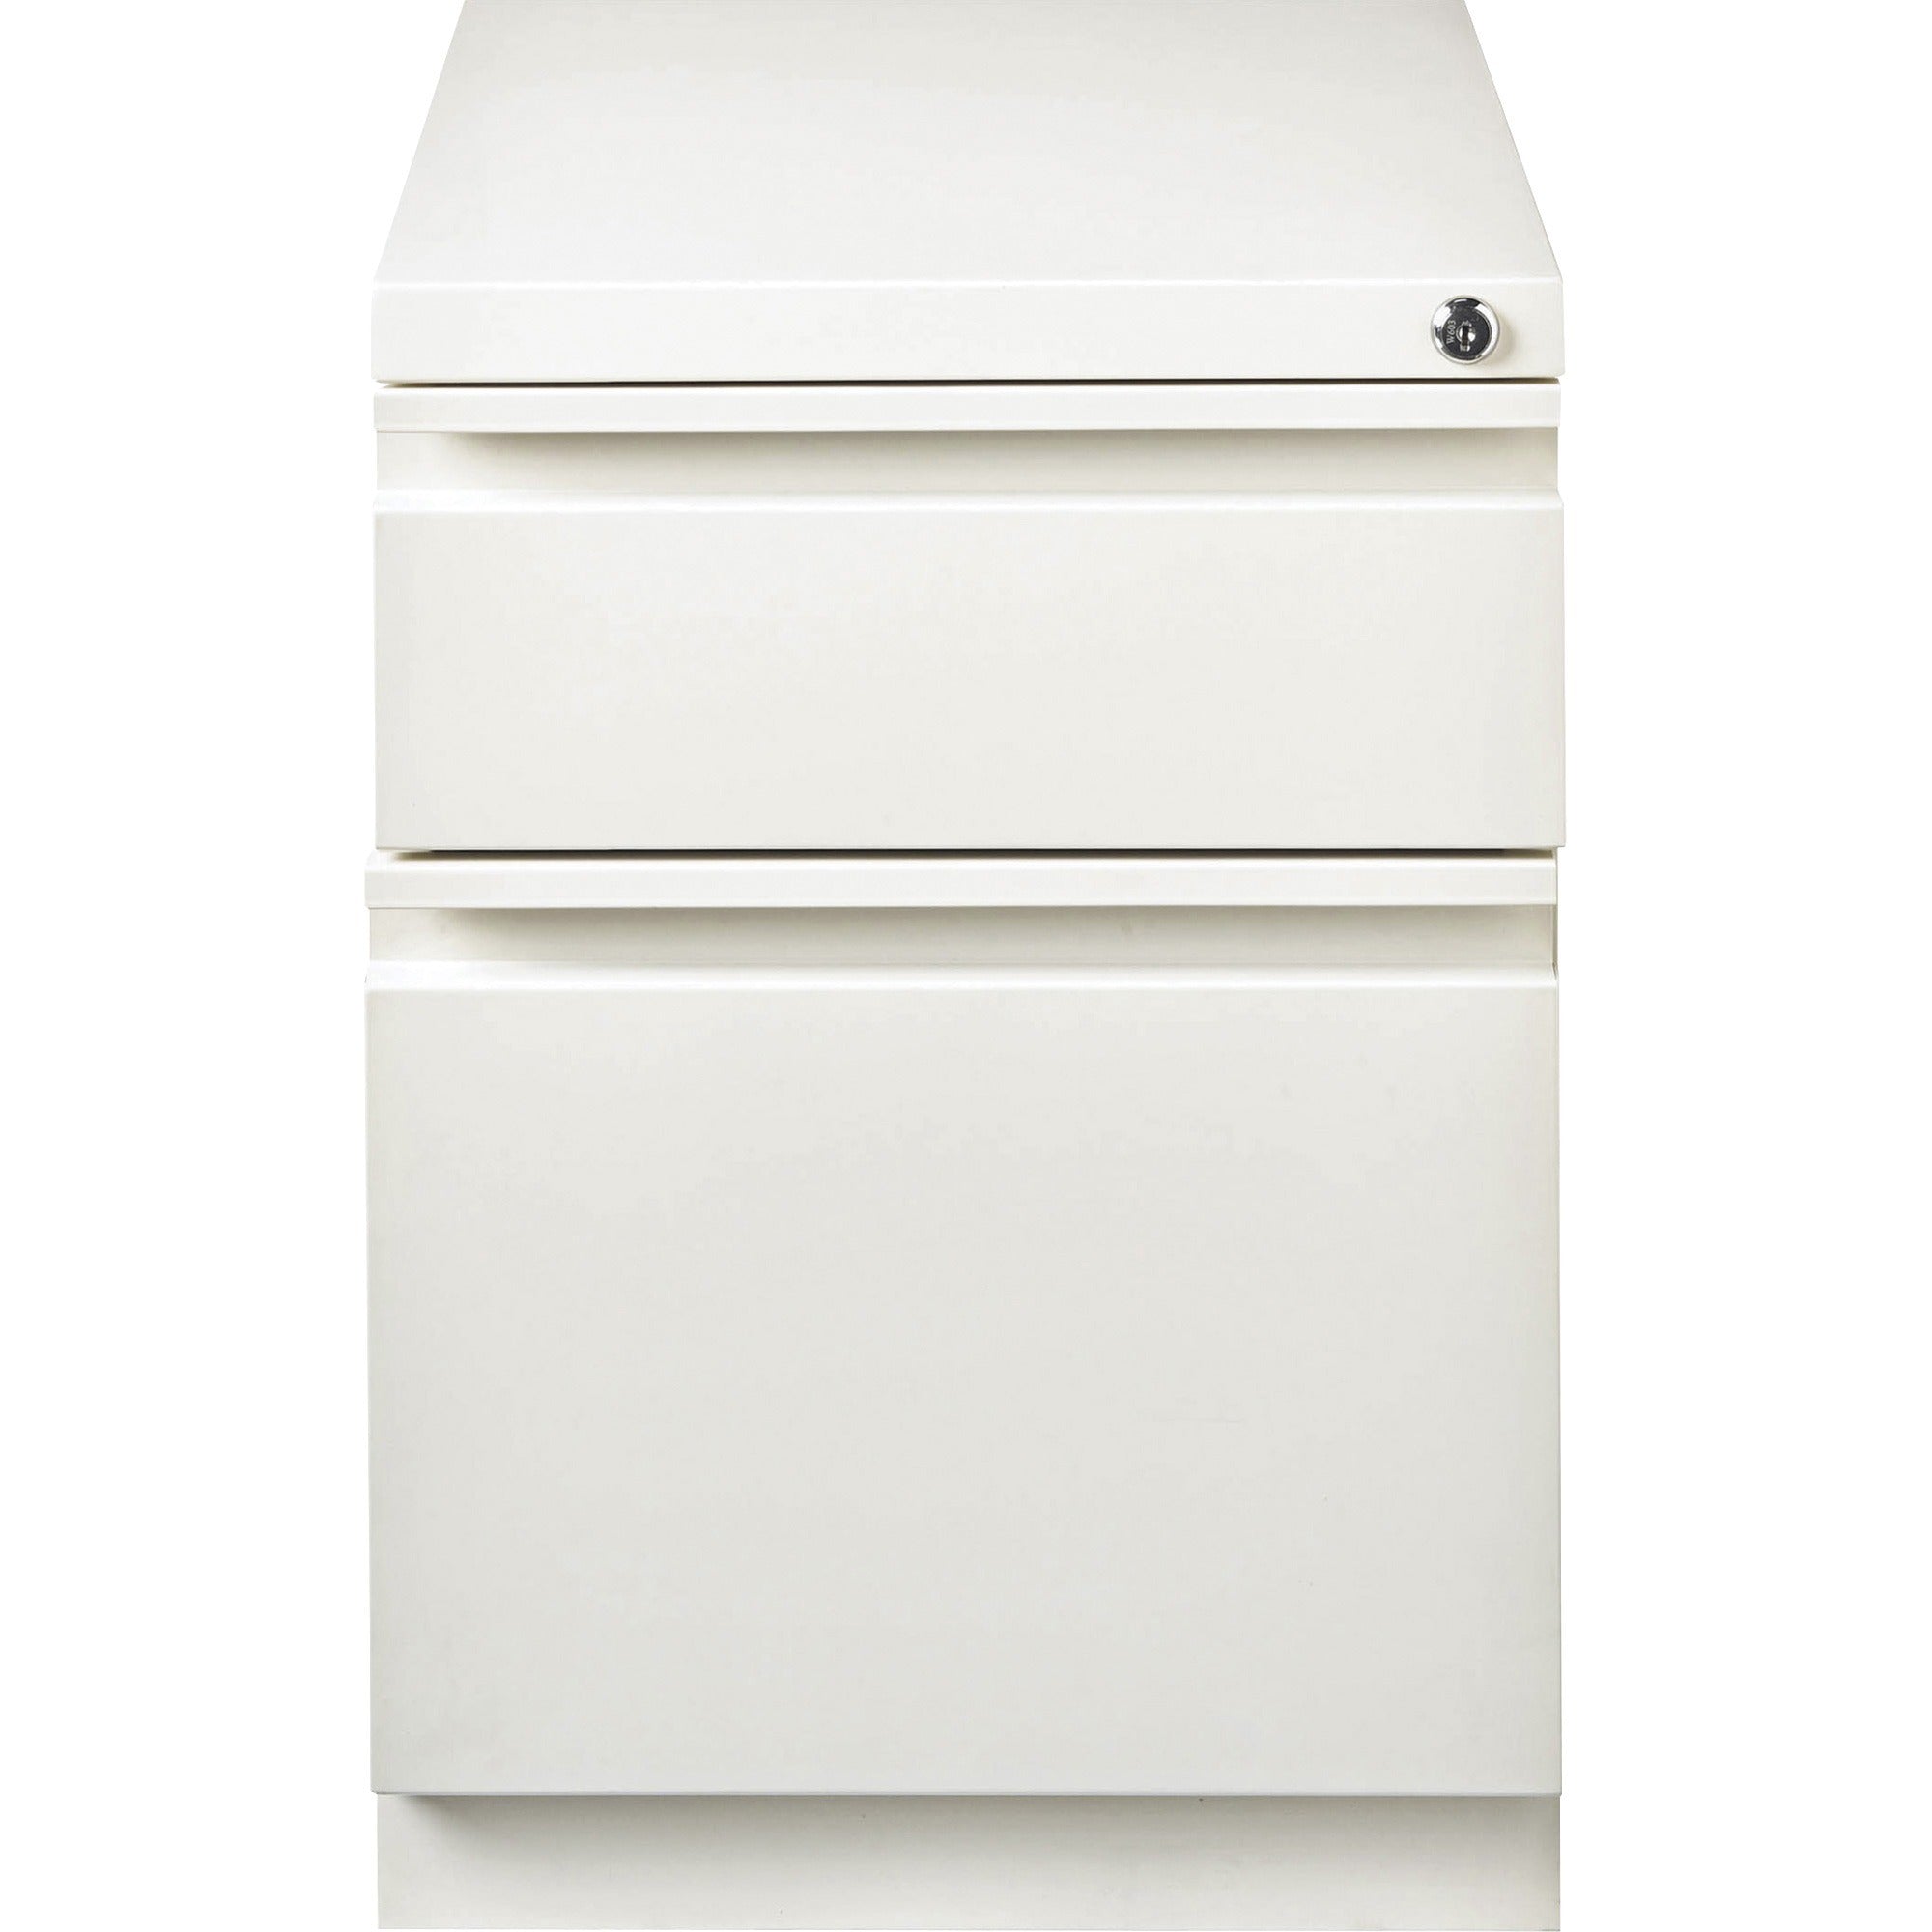 lorell-20-box-file-mobile-pedestal-15-x-199-x-238-for-box-file-letter-mobility-ball-bearing-suspension-removable-lock-pull-out-drawer-recessed-drawer-anti-tip-casters-key-lock-white-steel-recycled_llr00051 - 3